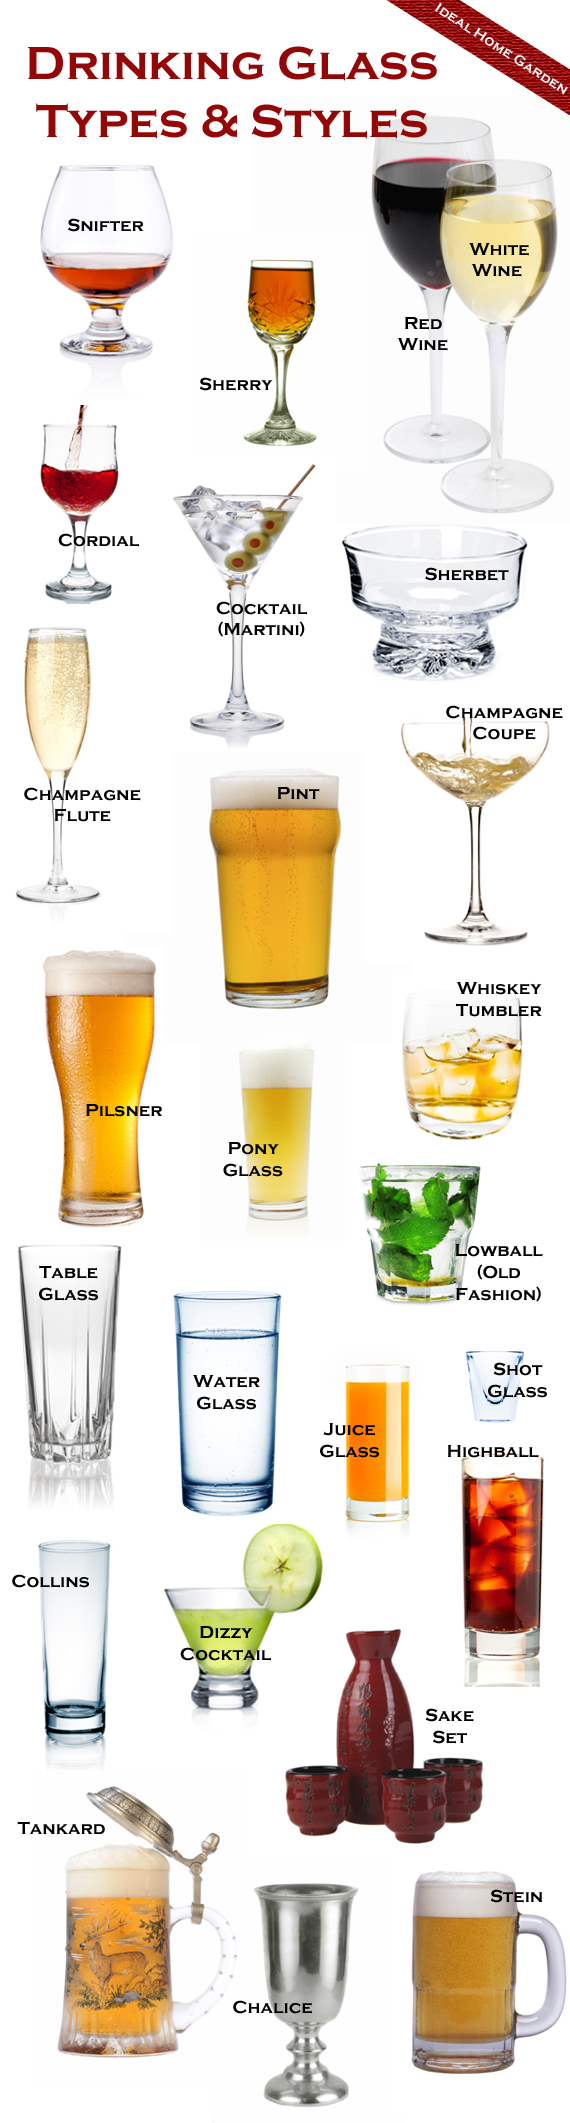 drinking_glasses_stein_chalice_sake_tankard_collins_dizzy_cocktail_martini_highball_juice_old_fashioned_lowball_shot_glass_table_water_whiskey_tumbler_pilsner_pint_pony_champagne_cordial_sherry_1363731968